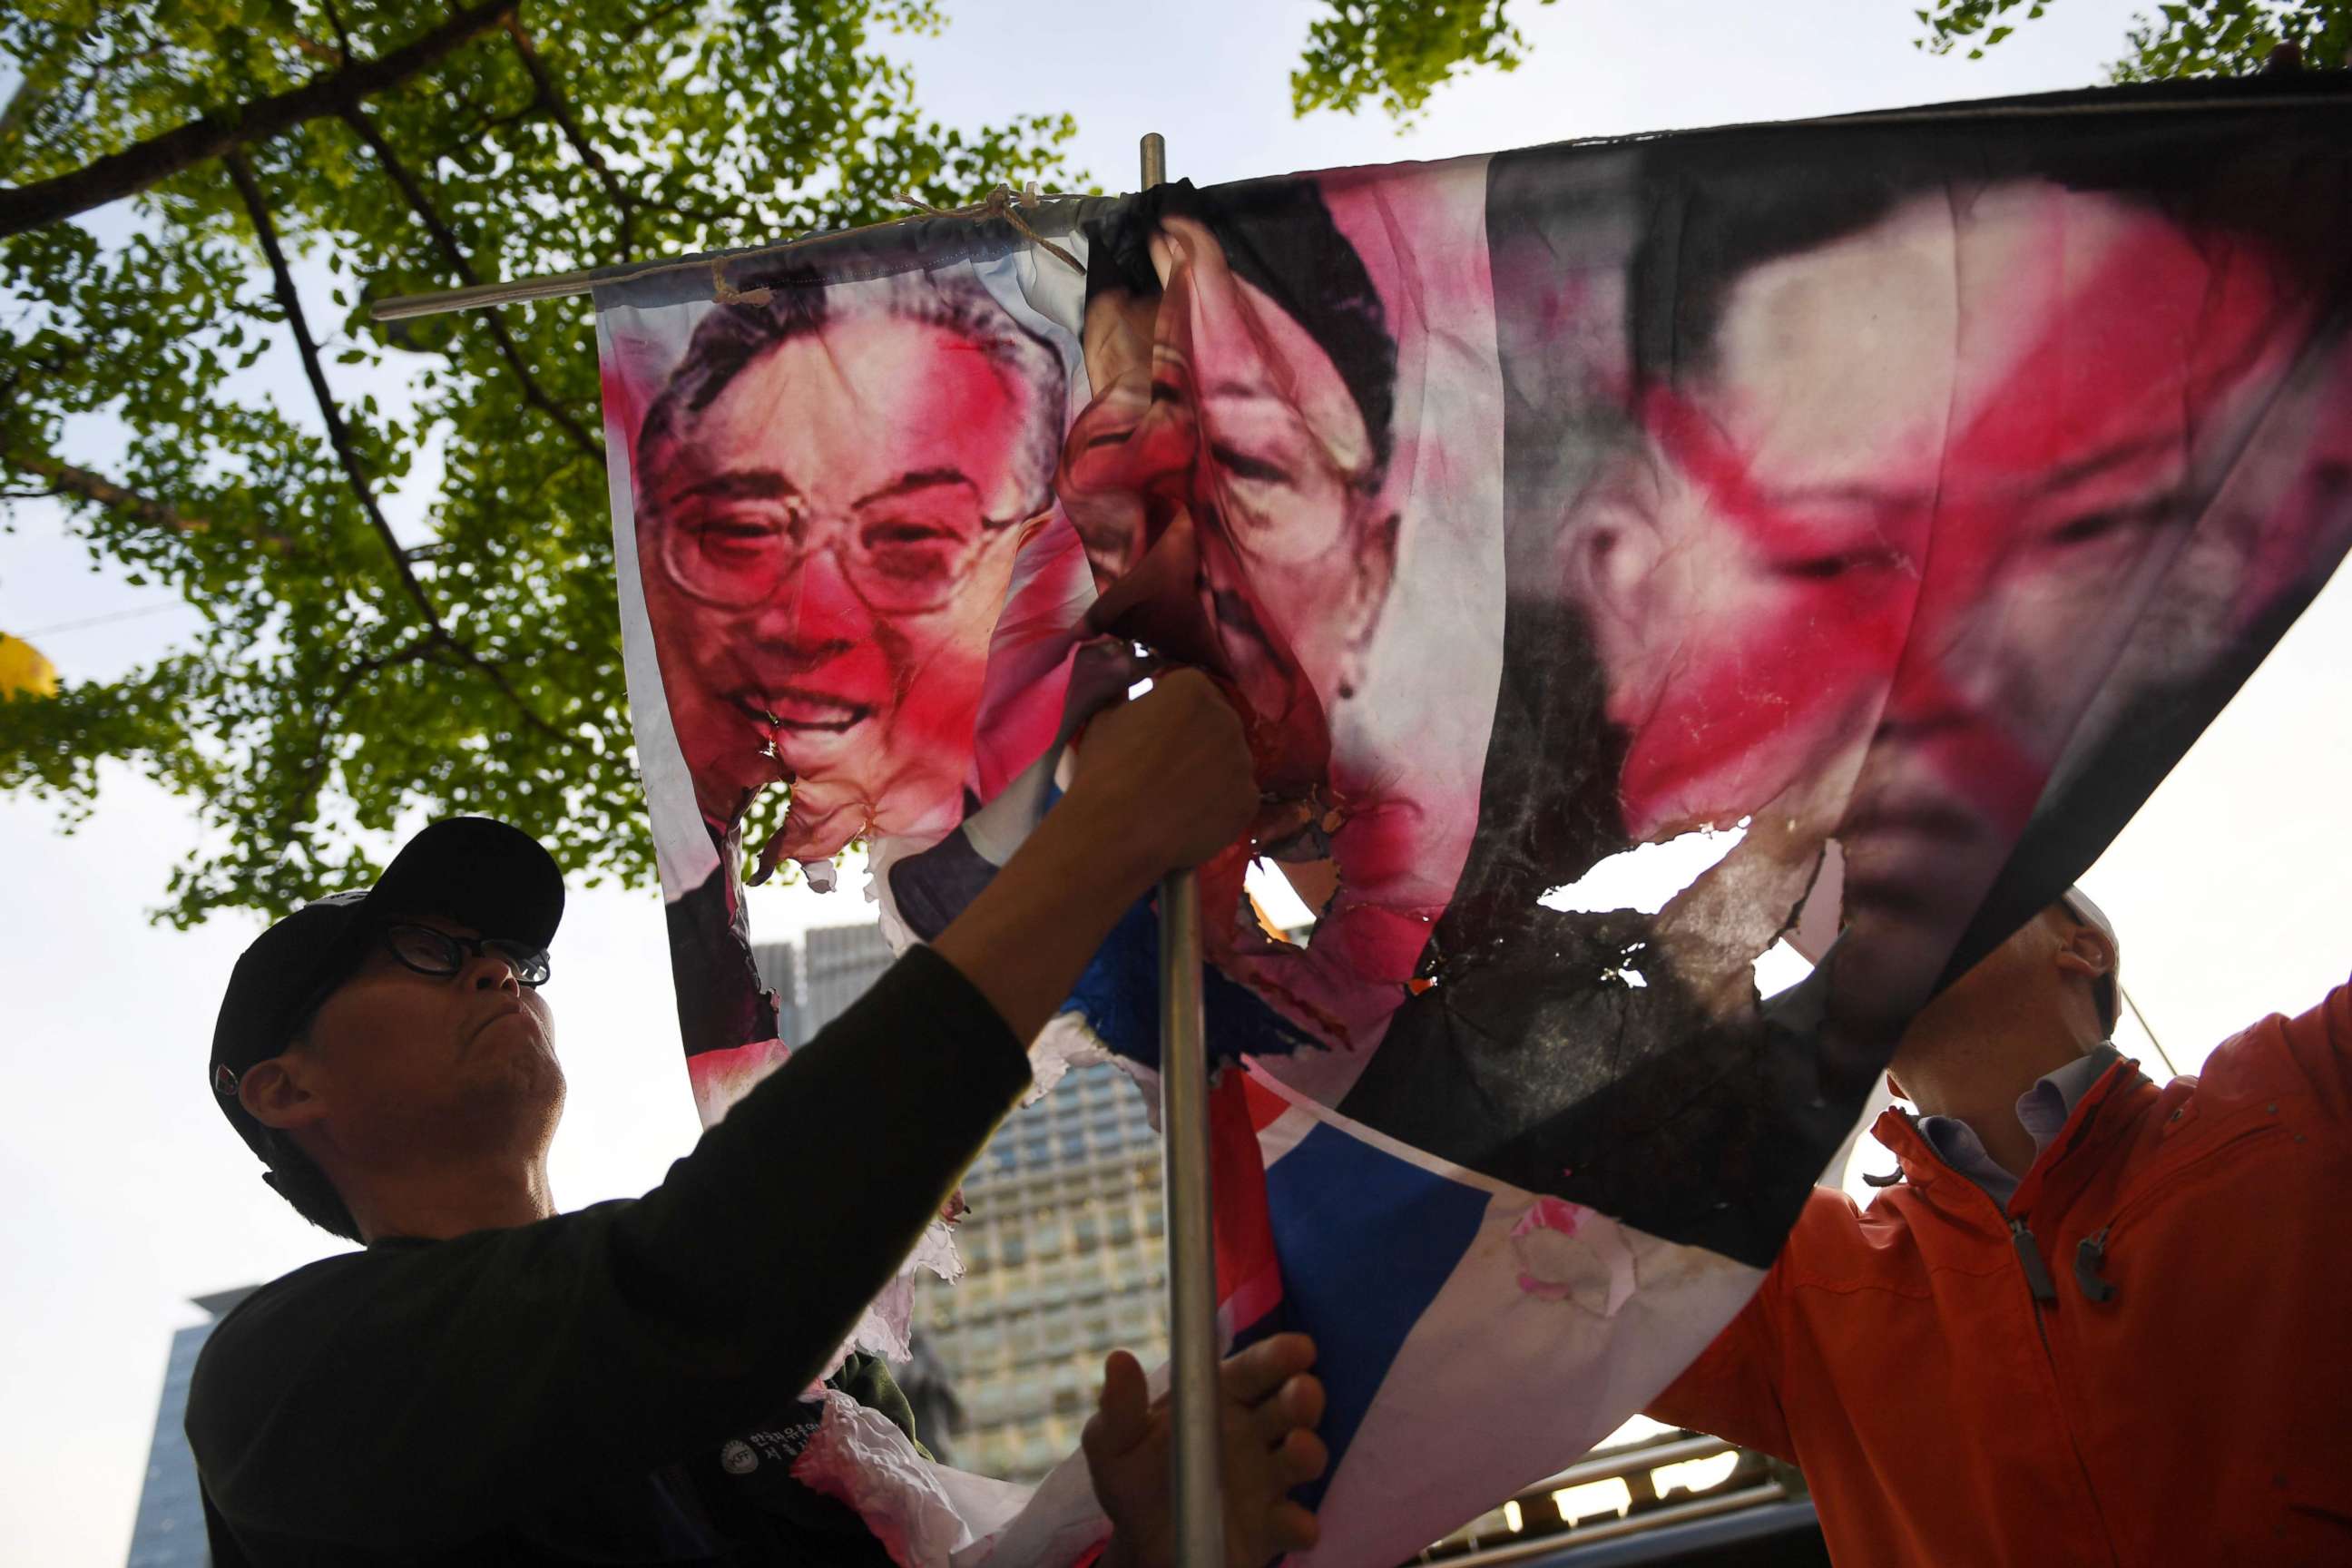 PHOTO: An holds partially burnt images of late North Korean leaders Kim Il Sung, Kim Jong Il, and current leader Kim Jong Un, during a protest opposing the inter-Korean summit in Seoul on April 26, 2018.